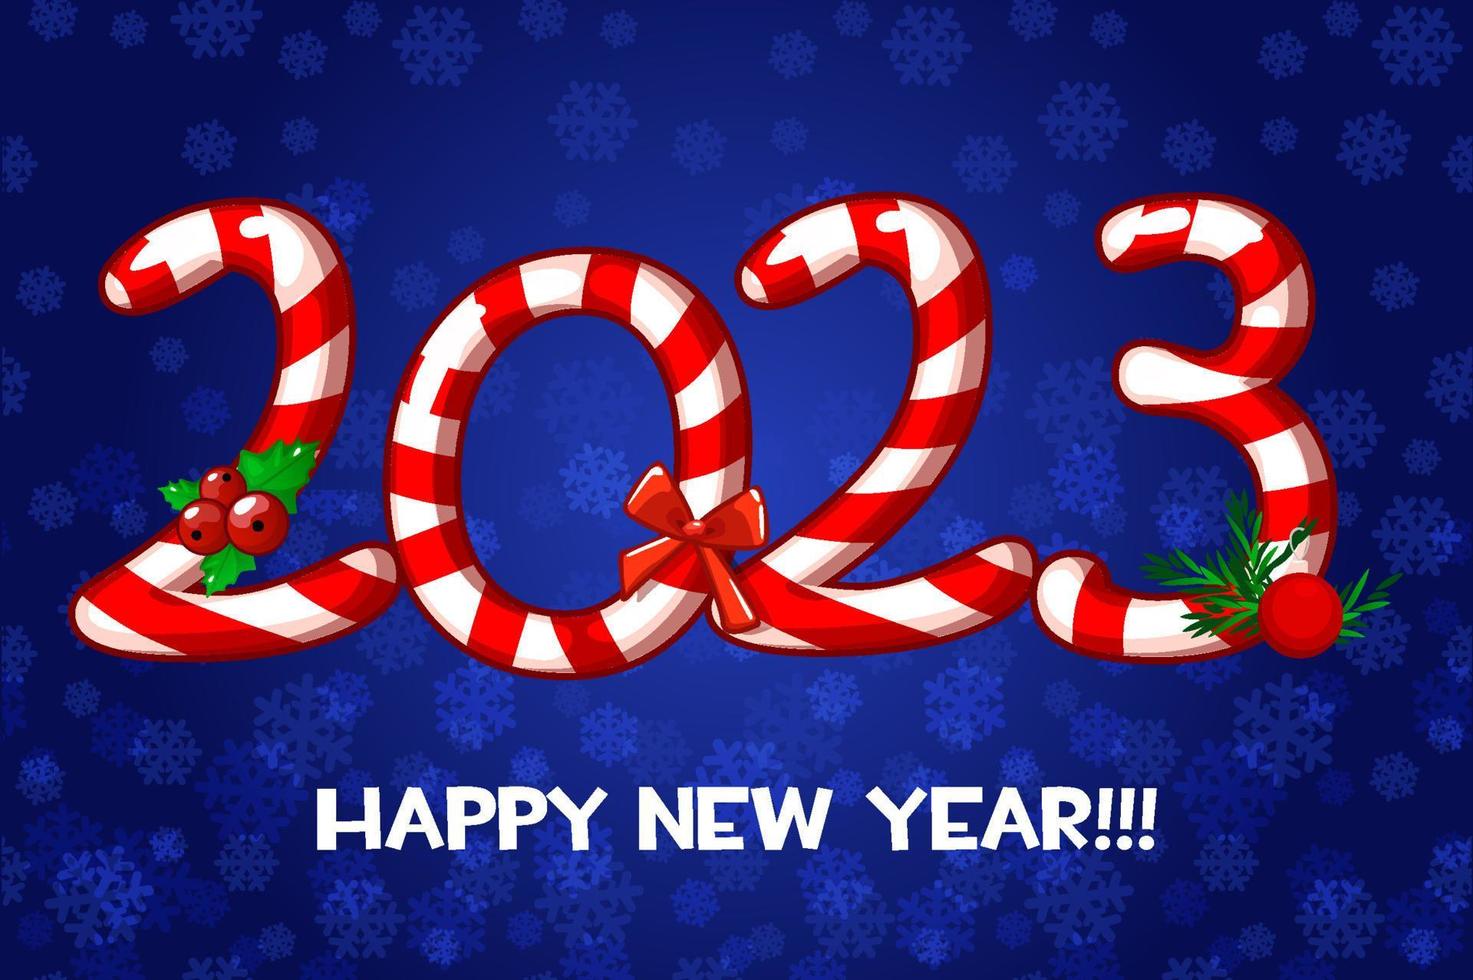 Greeting card or poster Happy New Year 2023 with candy. Vector illustration festive card with cute sweets.